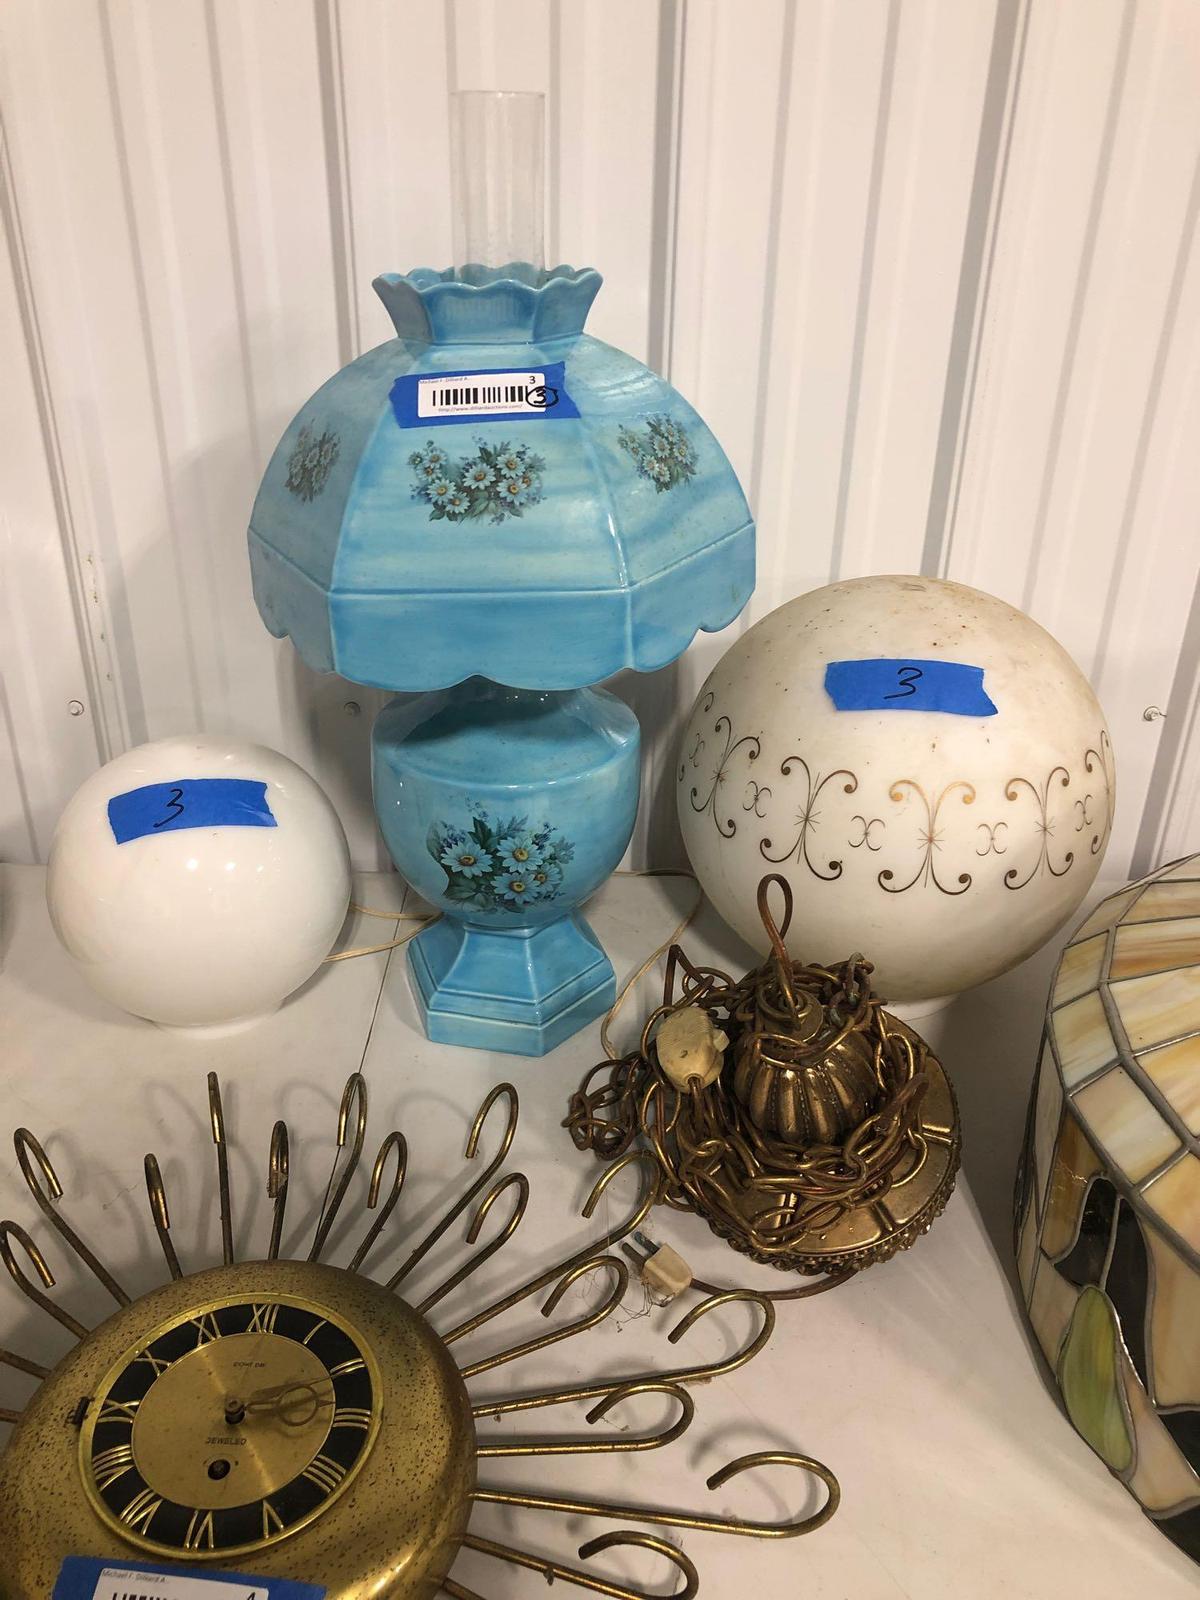 Decorative Table Lamp & two Globes